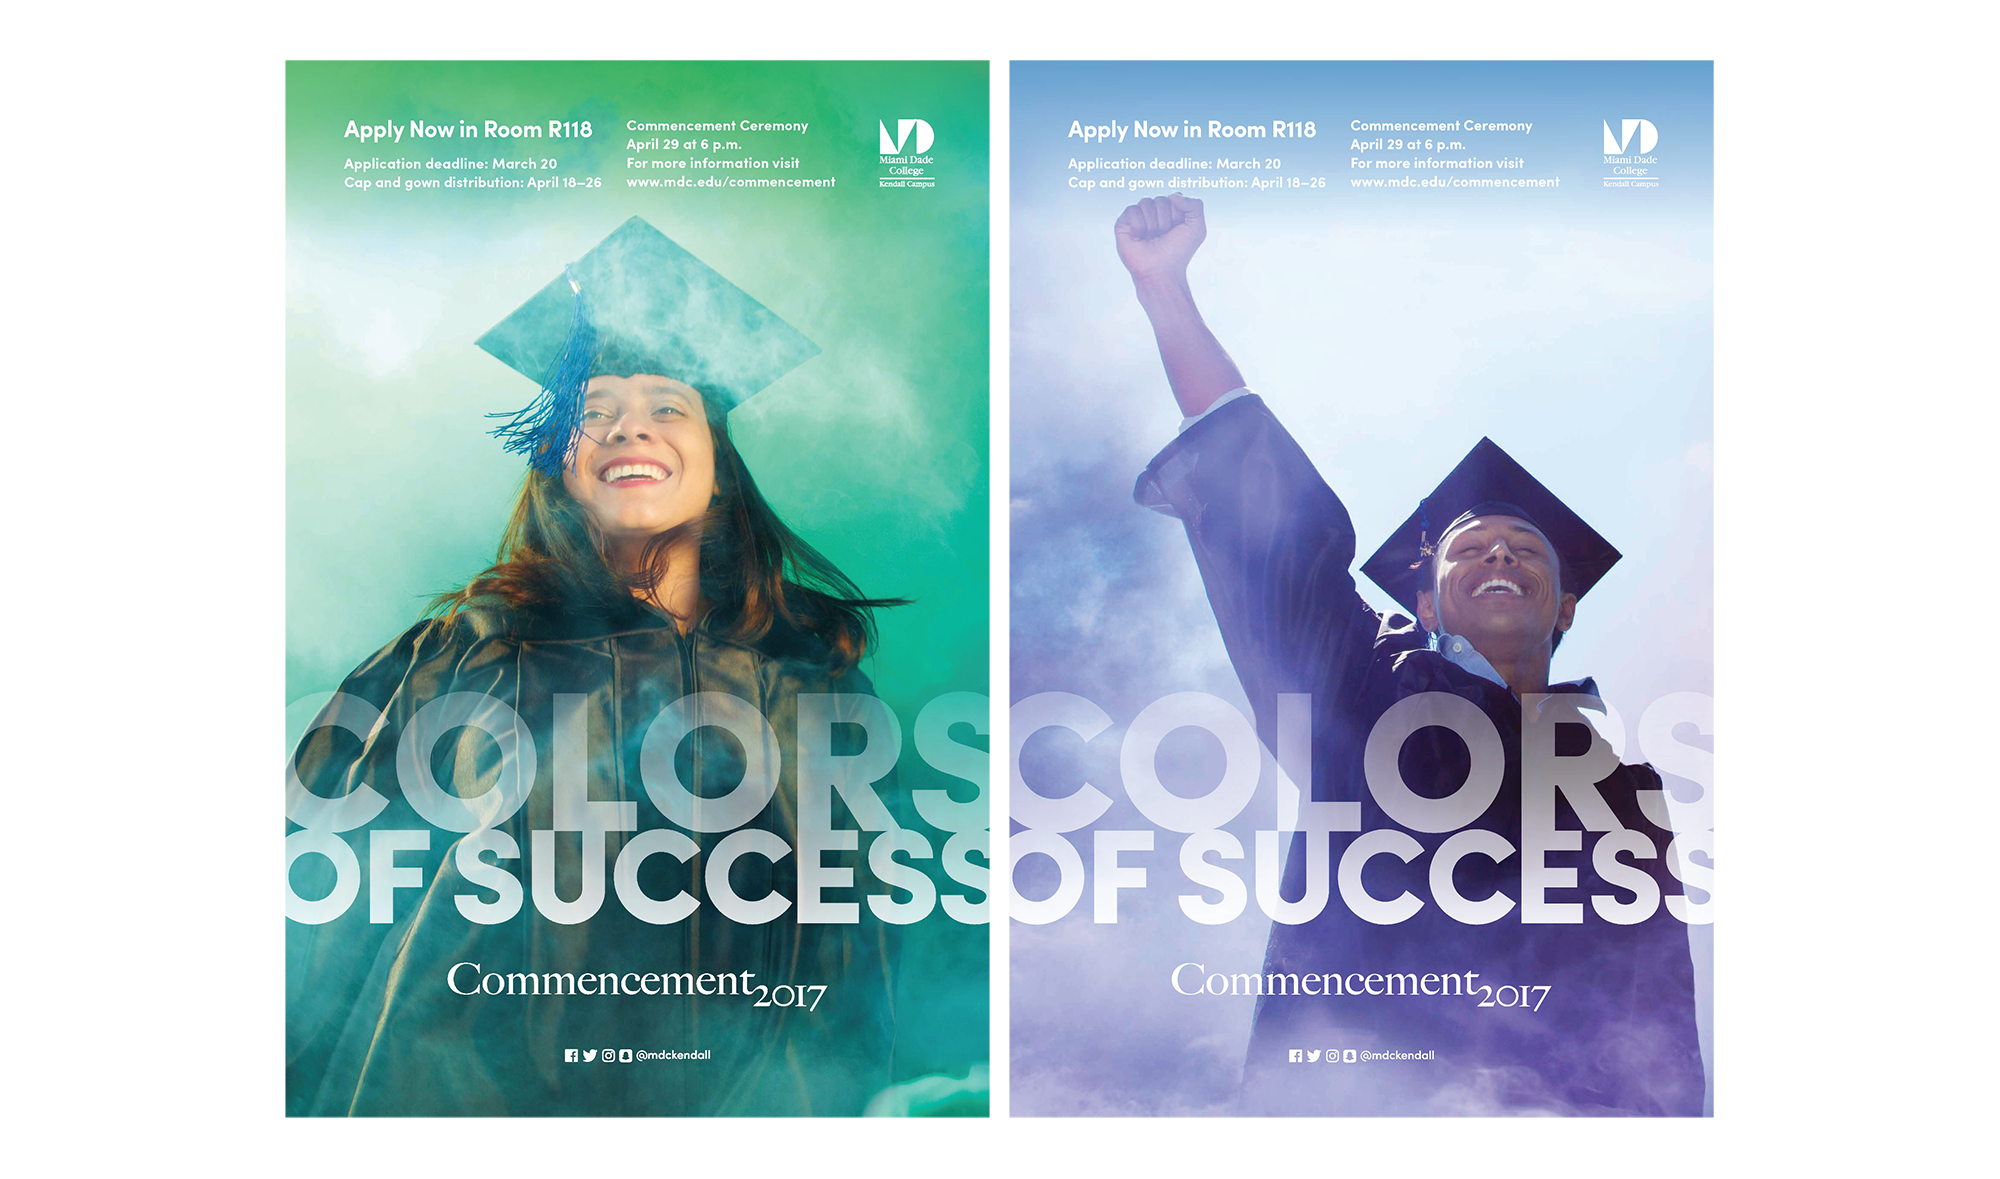 Commencement-2017-posters-03.png